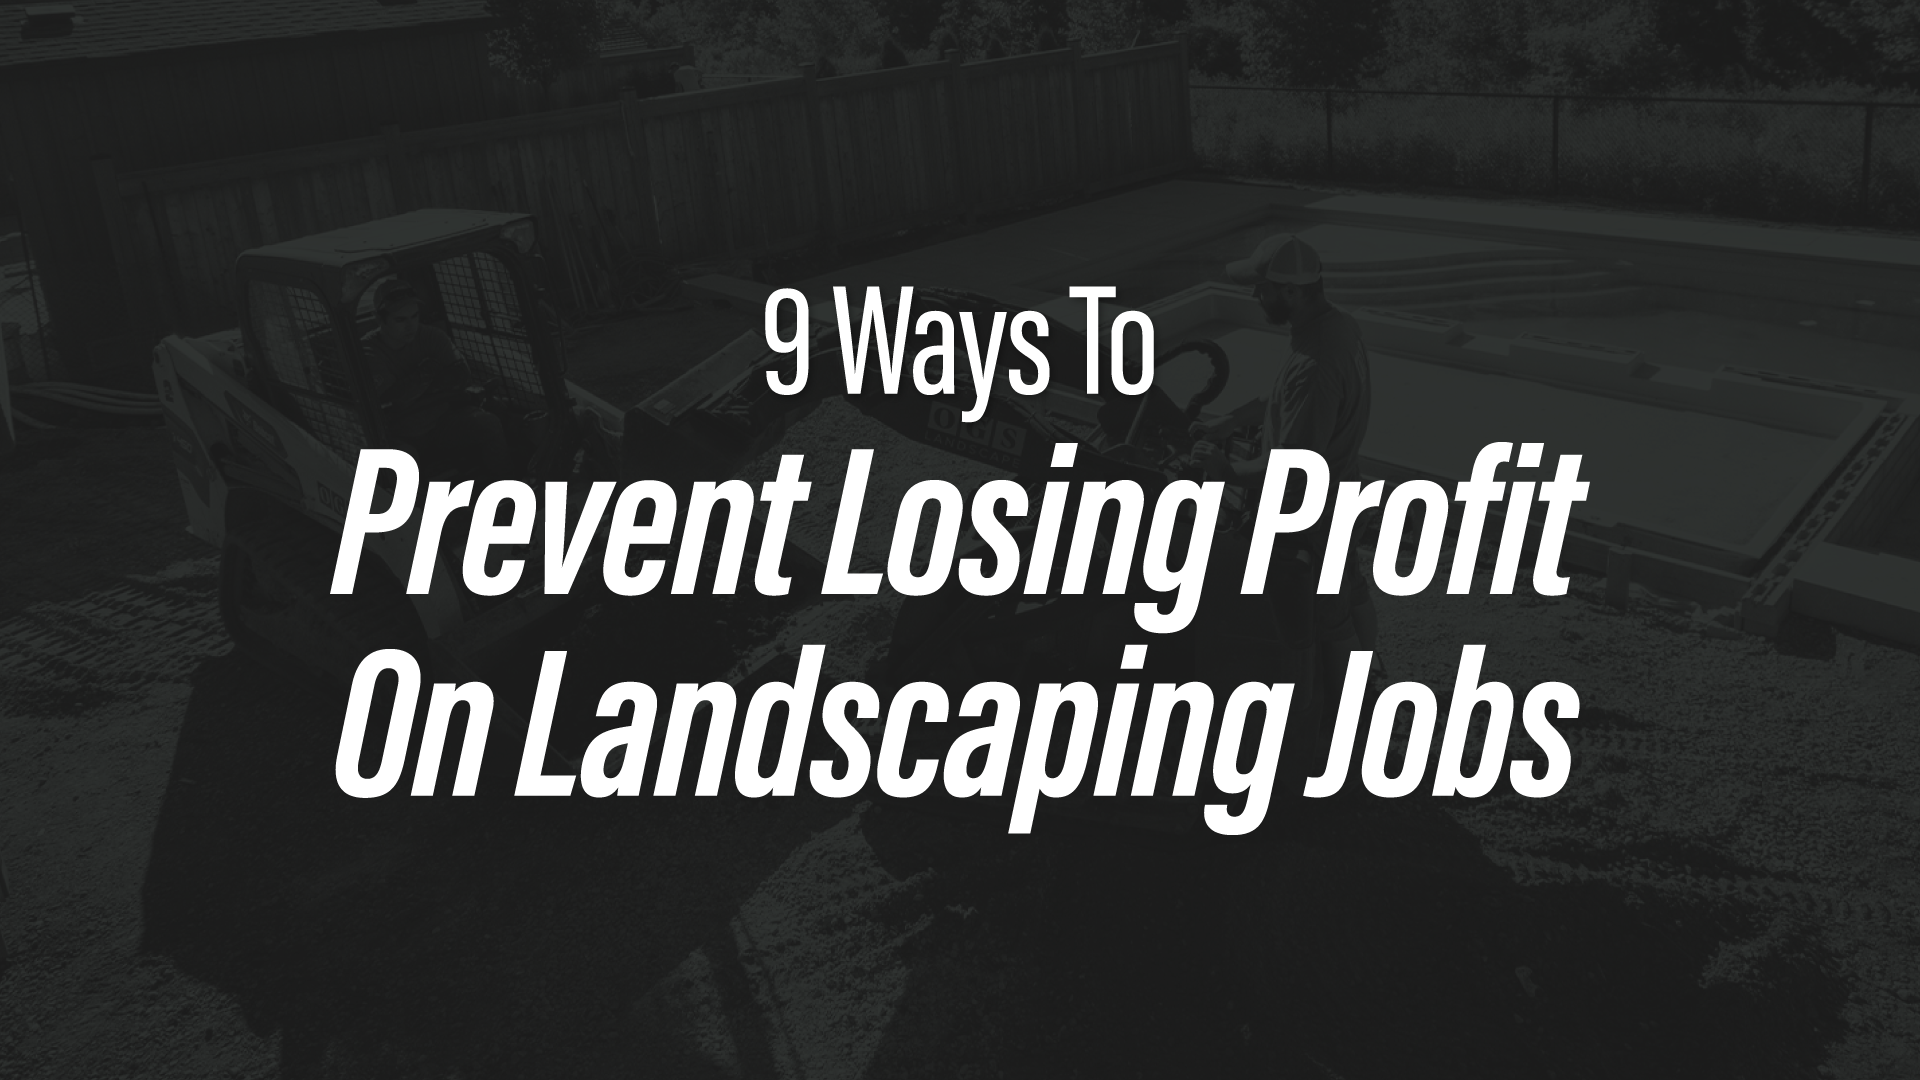 ||Prevent Losing Profit On Landscaping Jobs